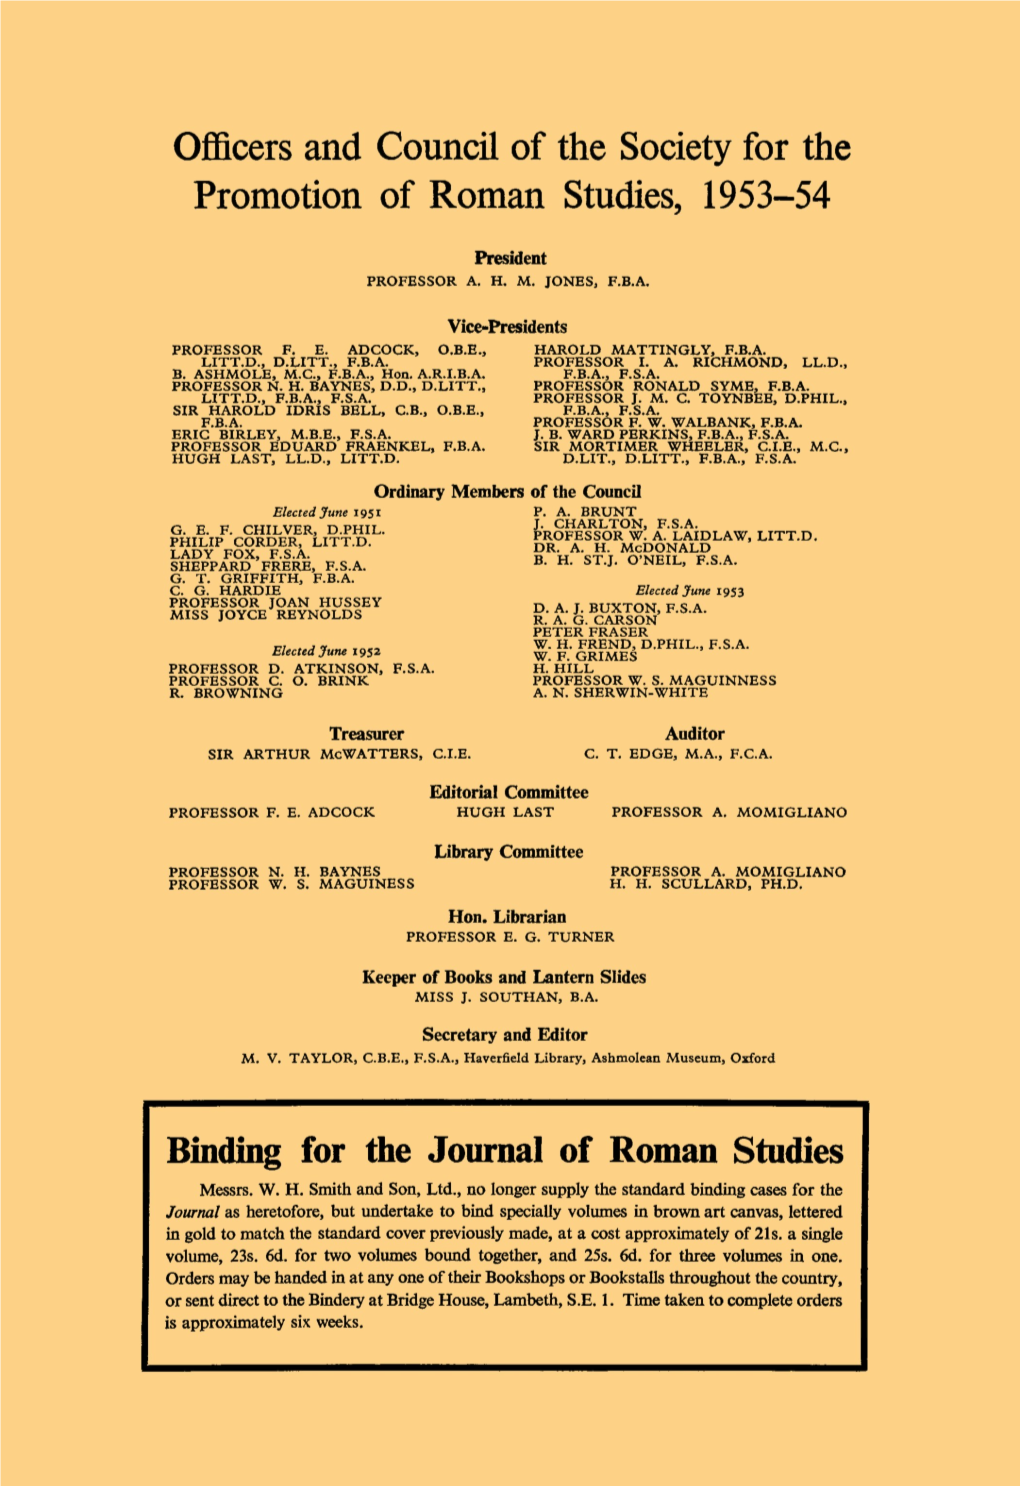 Officers and Council of the Society for the Promotion of Roman Studies, 1953-54